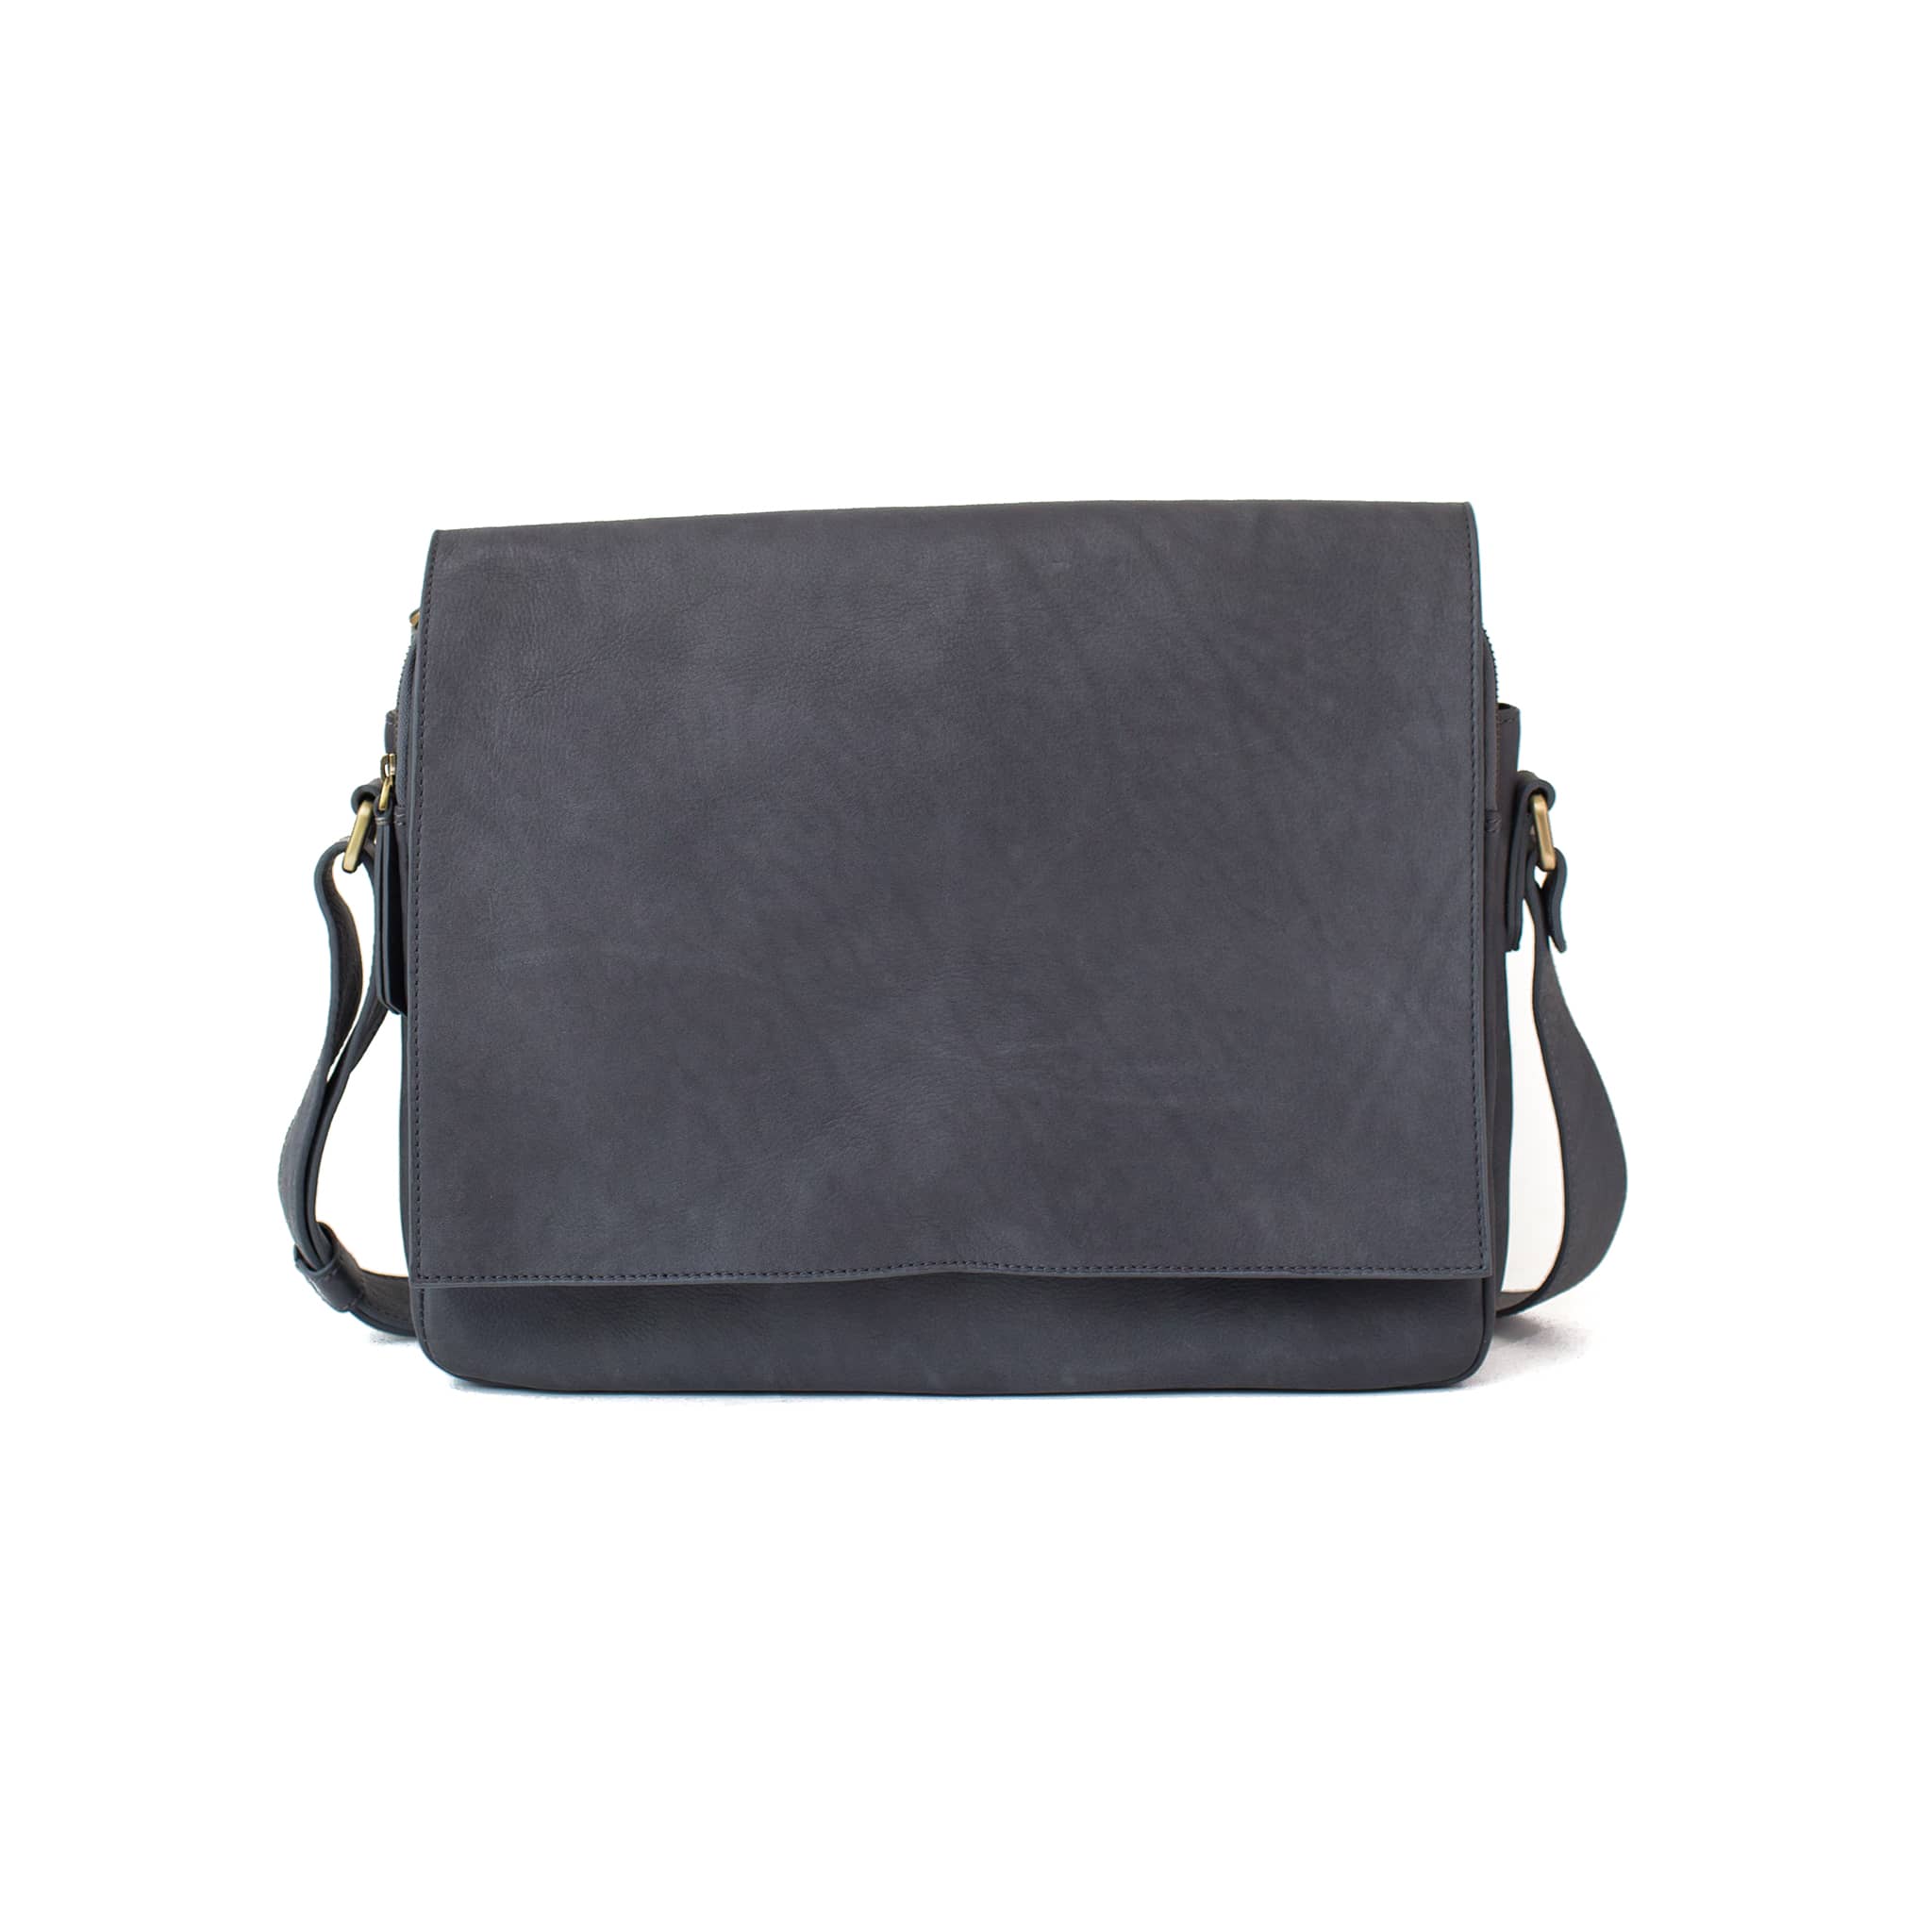 Ford messenger gray raw leather unisex bag in has a minimal, classic style.